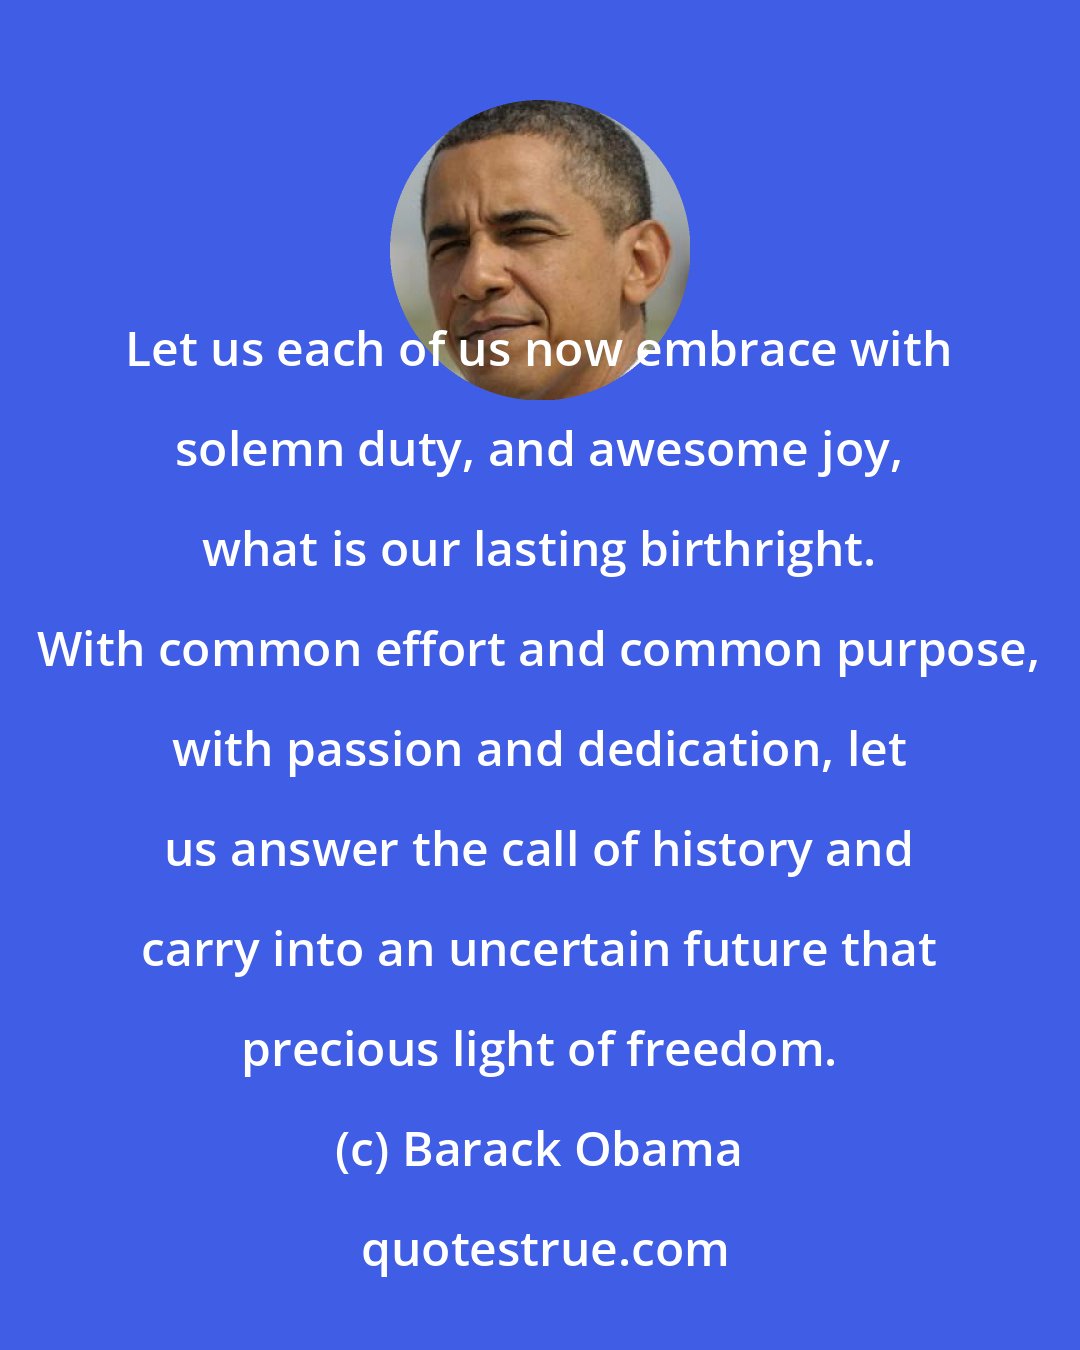 Barack Obama: Let us each of us now embrace with solemn duty, and awesome joy, what is our lasting birthright. With common effort and common purpose, with passion and dedication, let us answer the call of history and carry into an uncertain future that precious light of freedom.